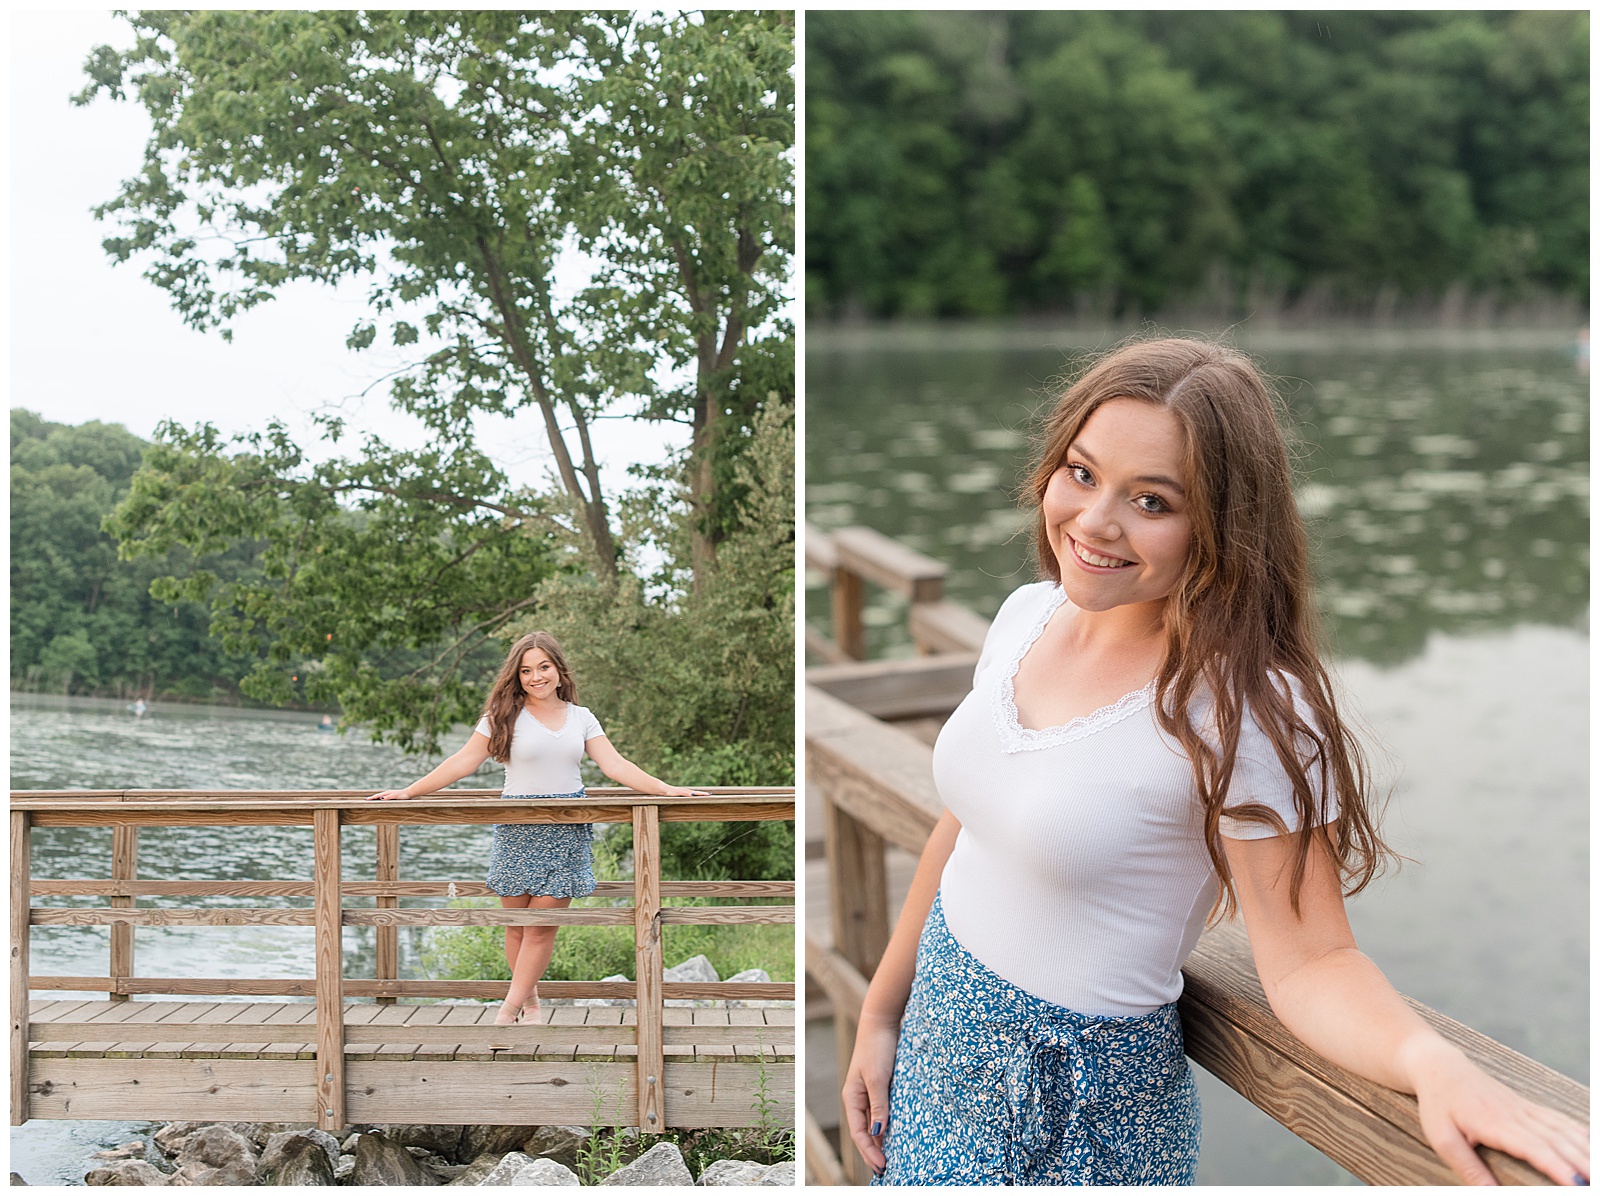 senior girl leaning against rustic wooden fence on dock of lake smiling with large trees behind her